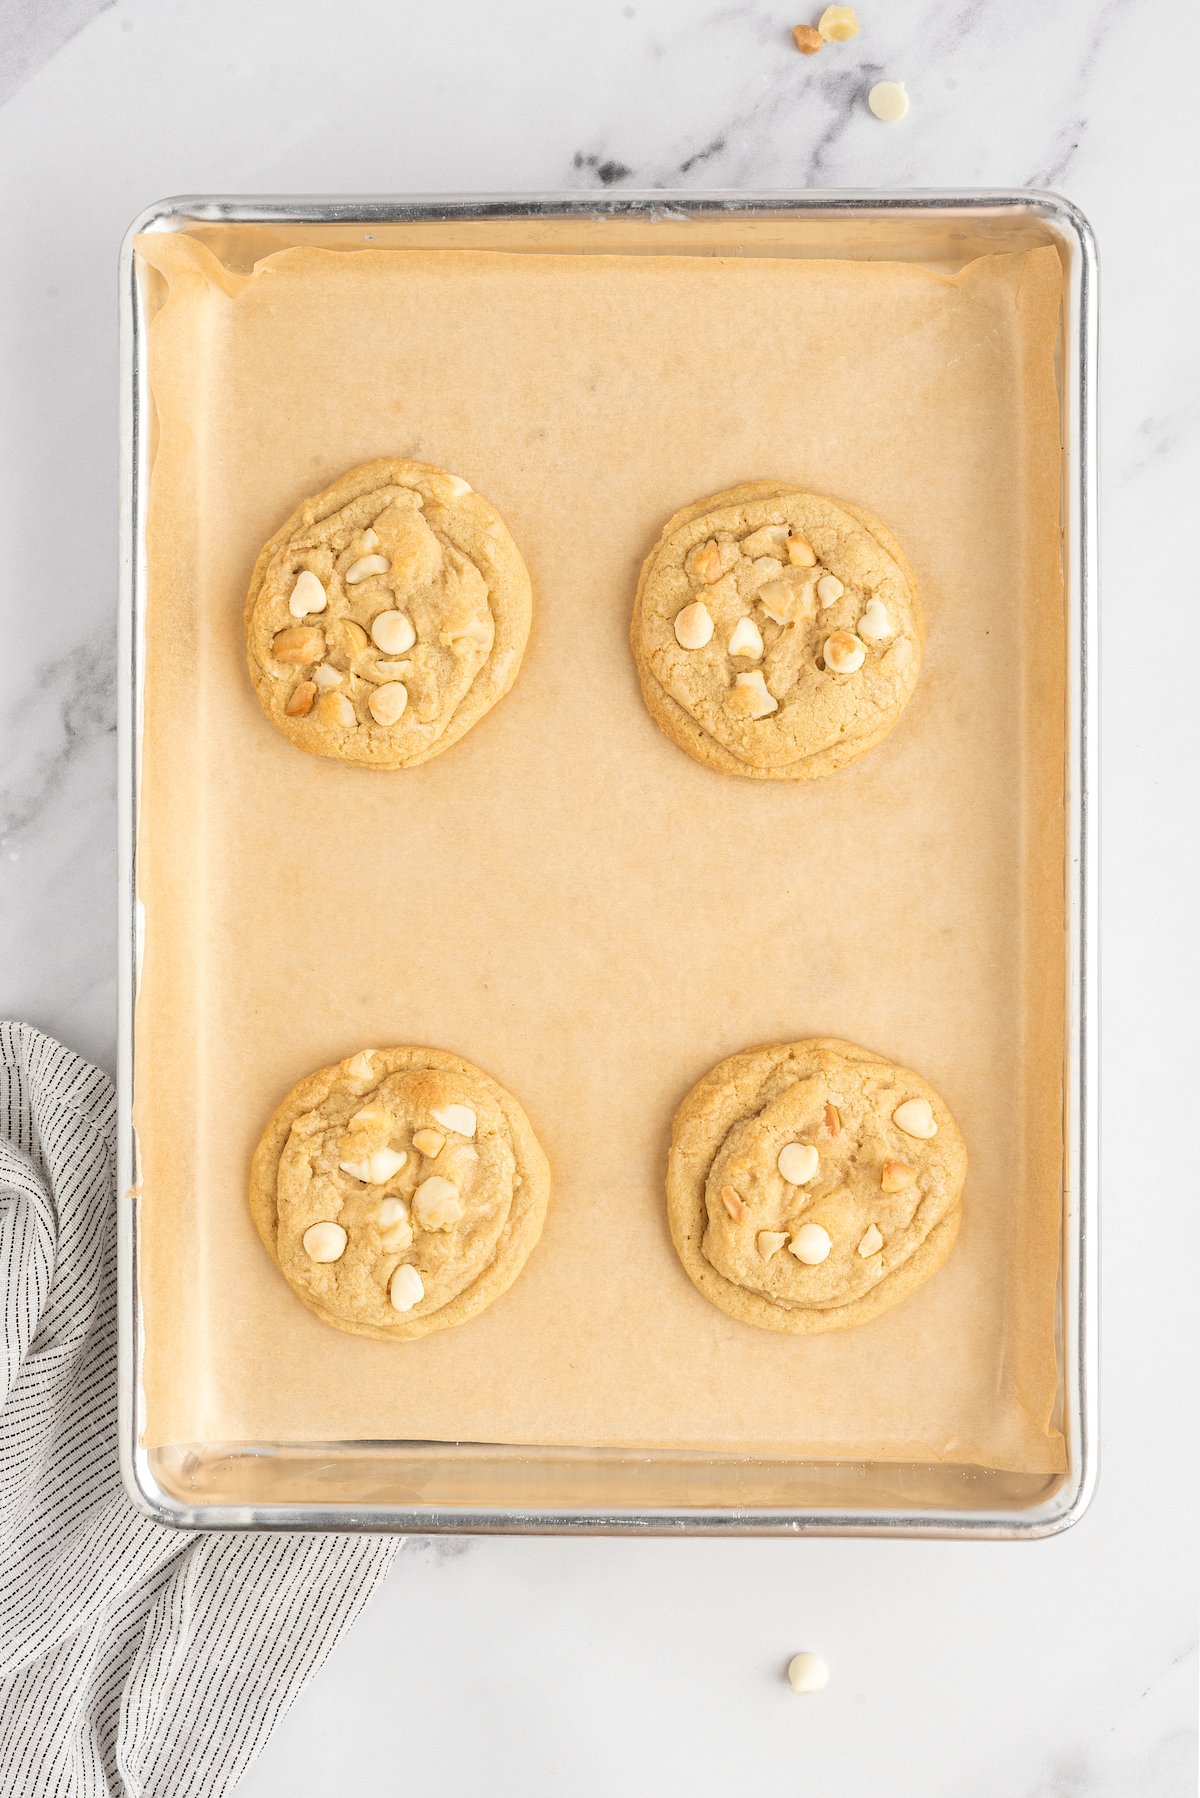 Baked white chocolate cookies on a baking sheet.